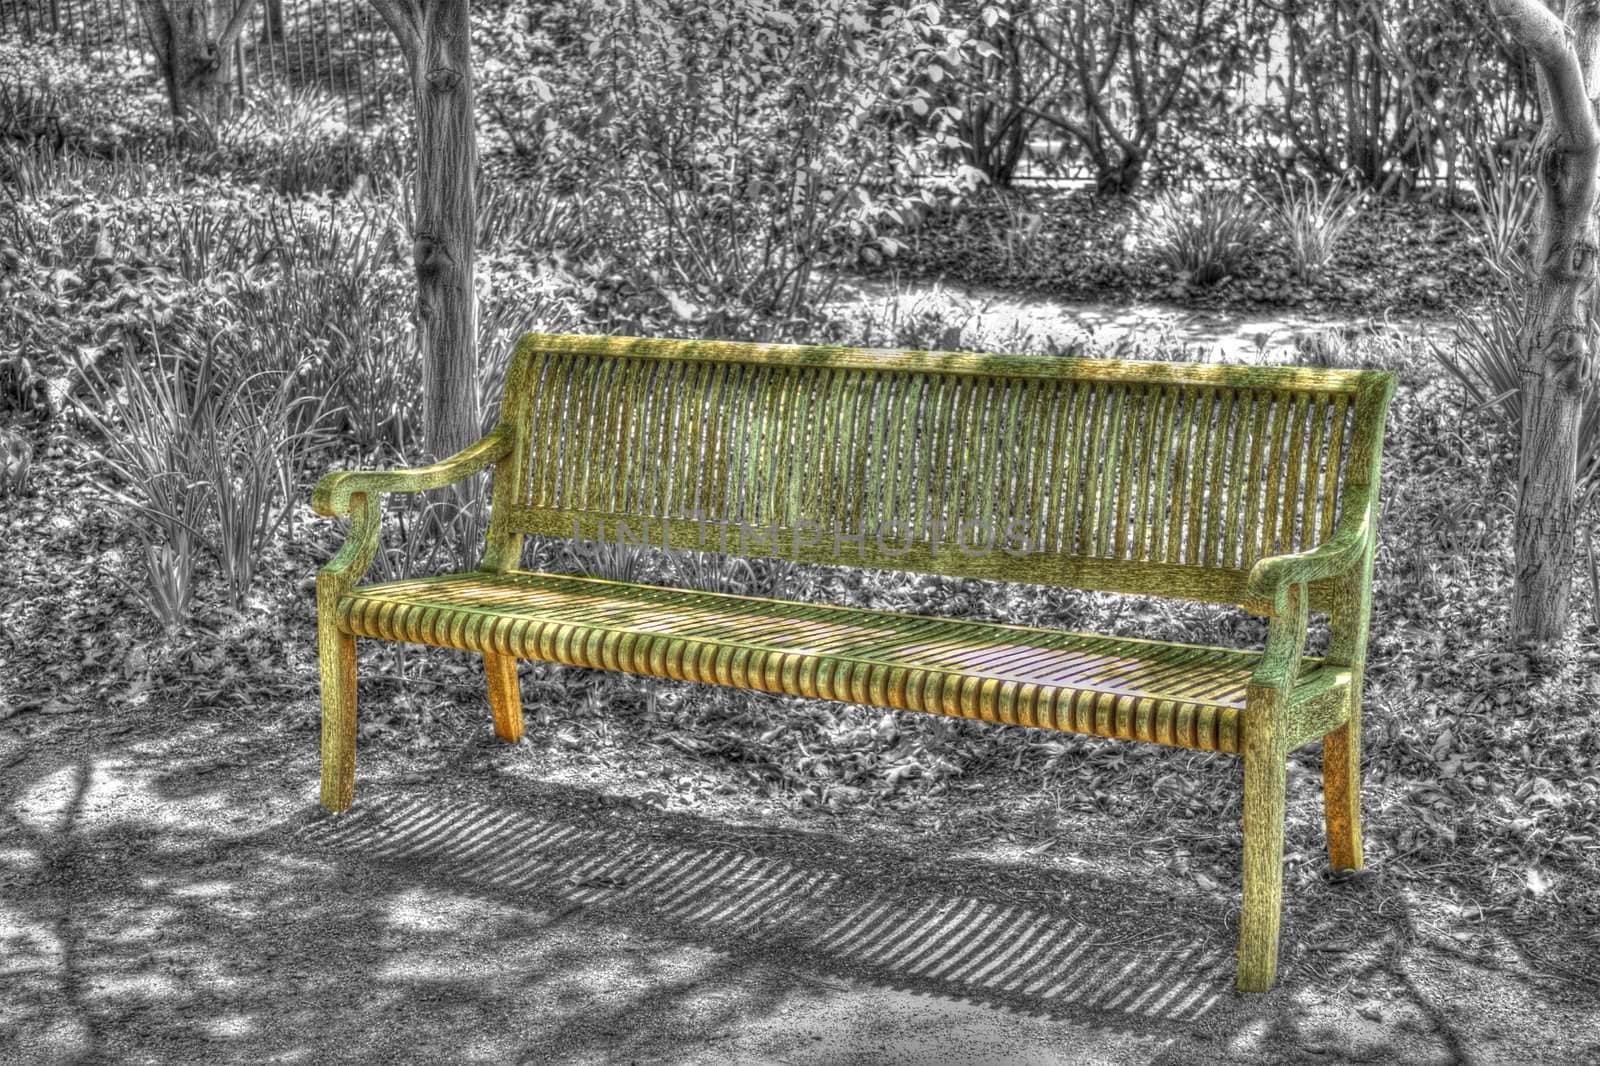 A bench in a city park, shot in HDR